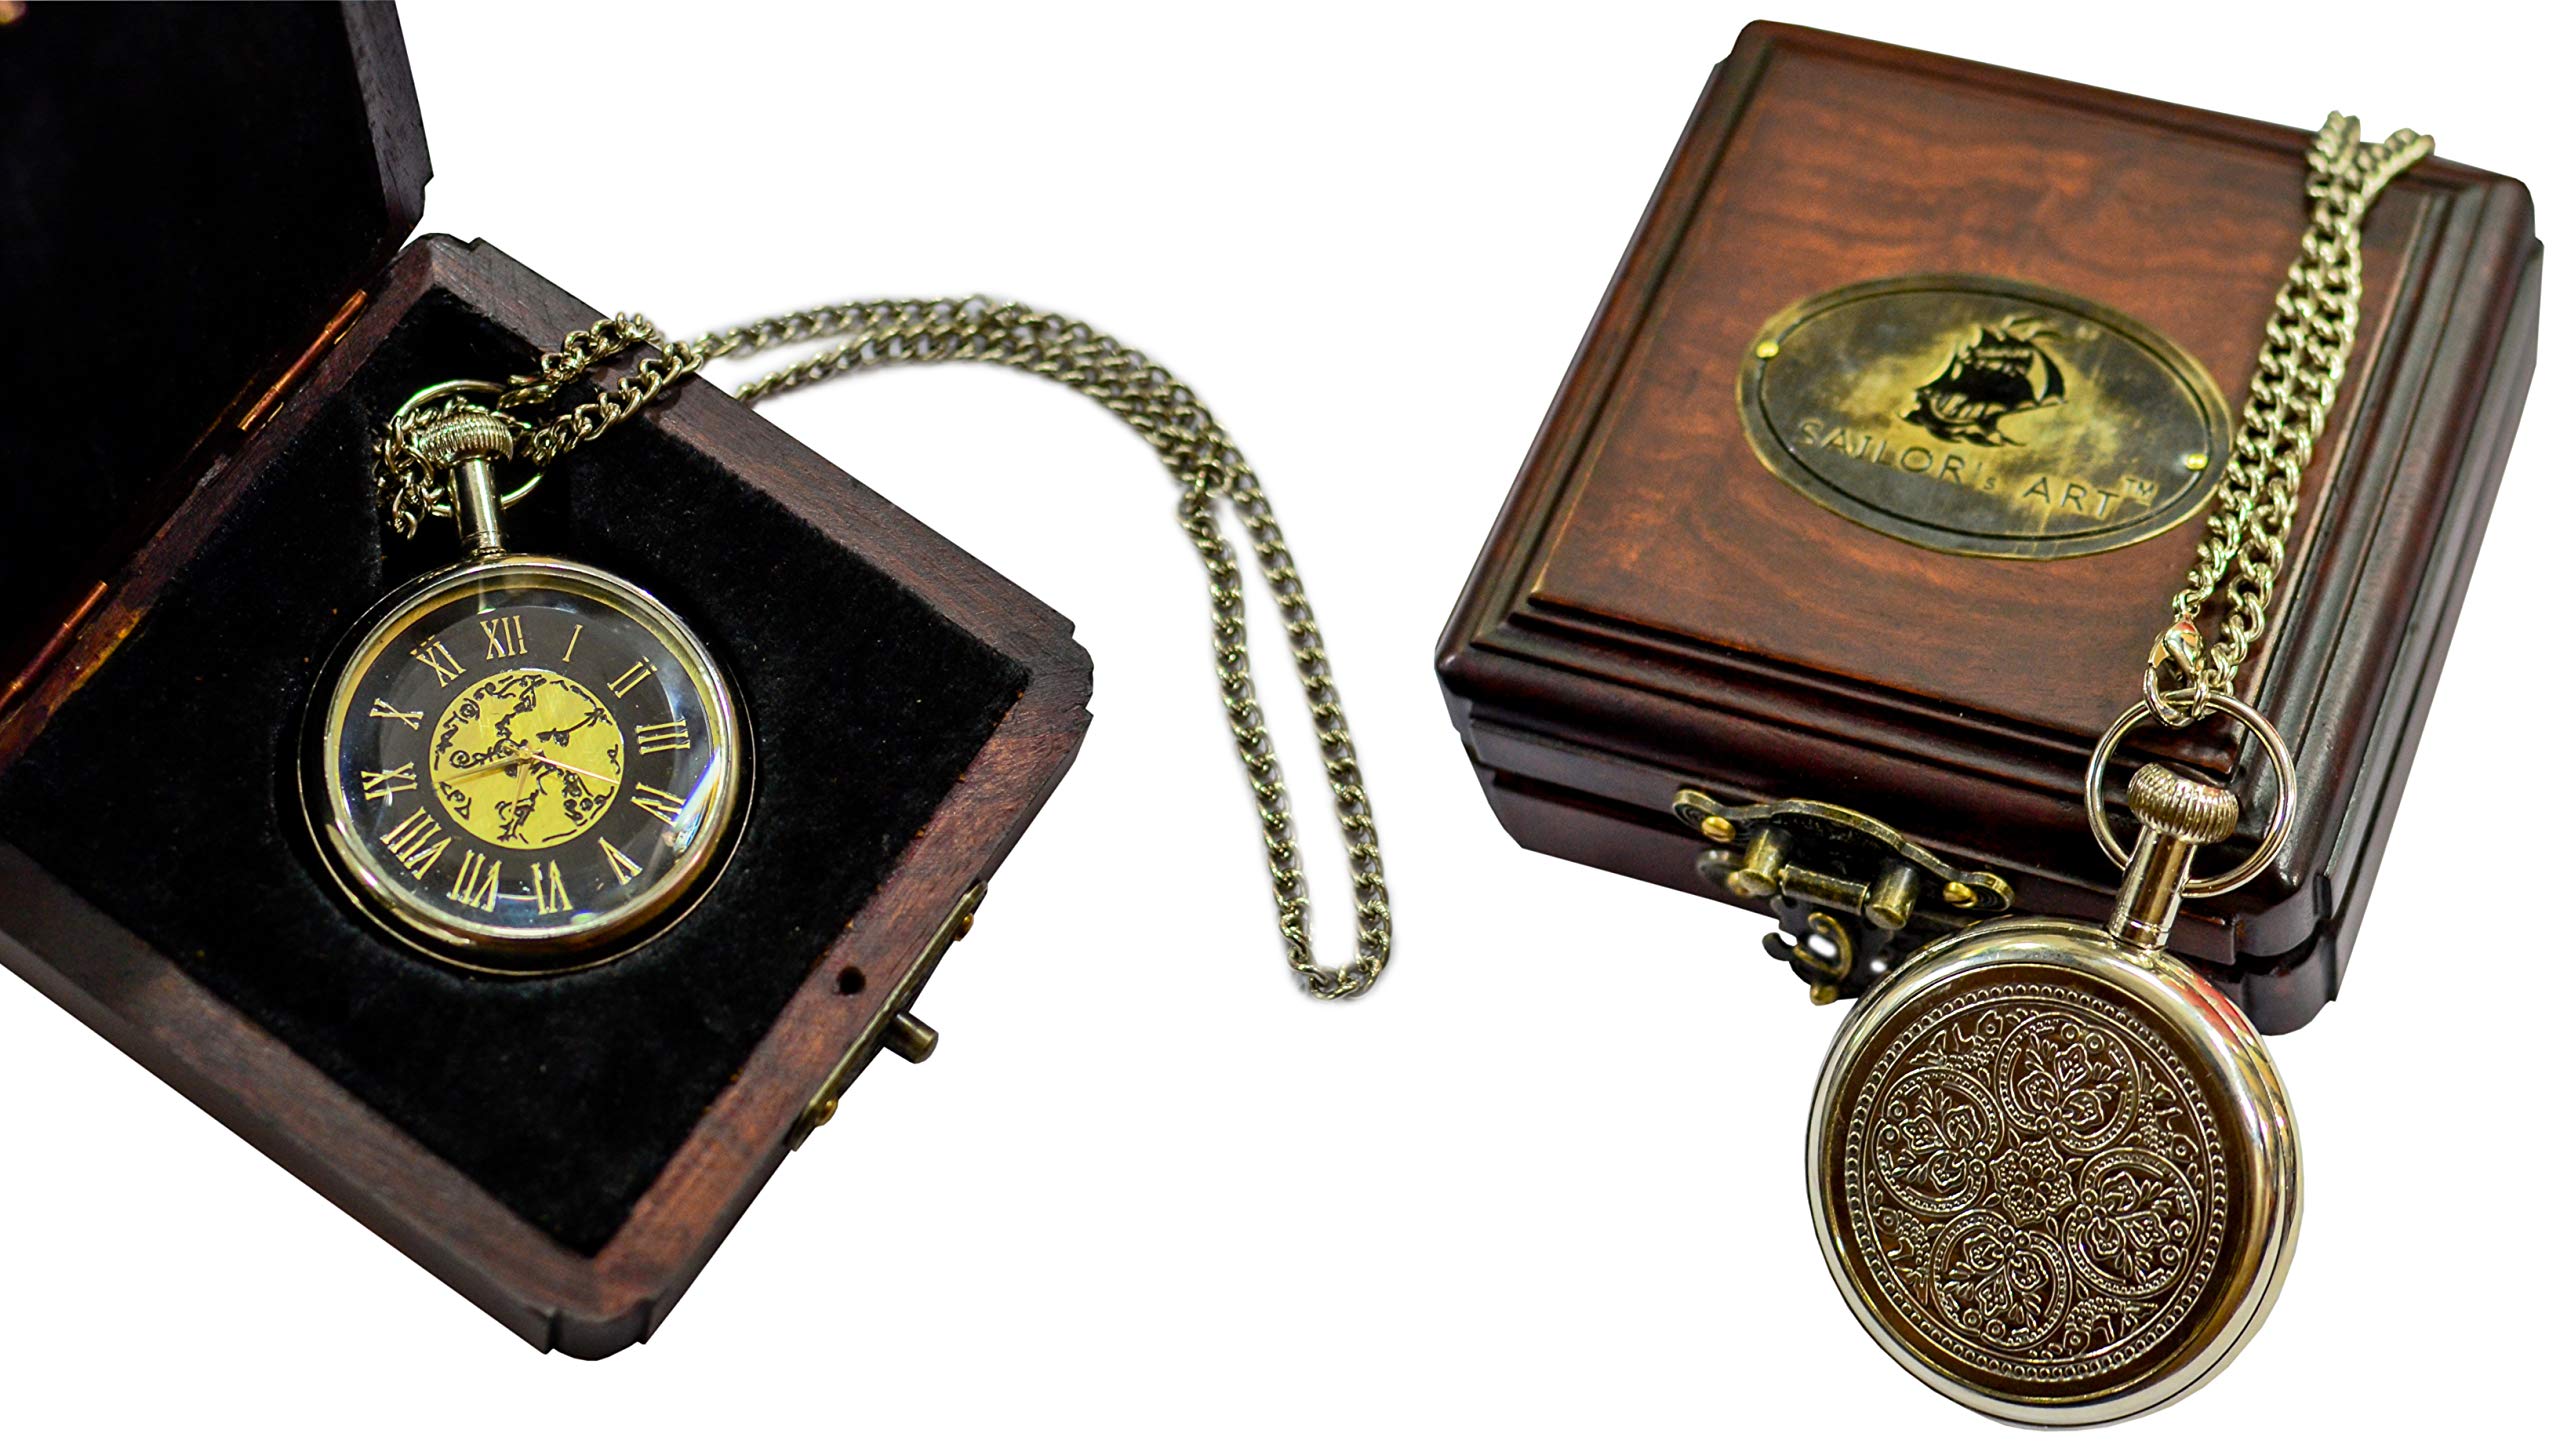 Sailor's Art Antique Brass Ship Pocket Watch with Wooden Box Unique Gift